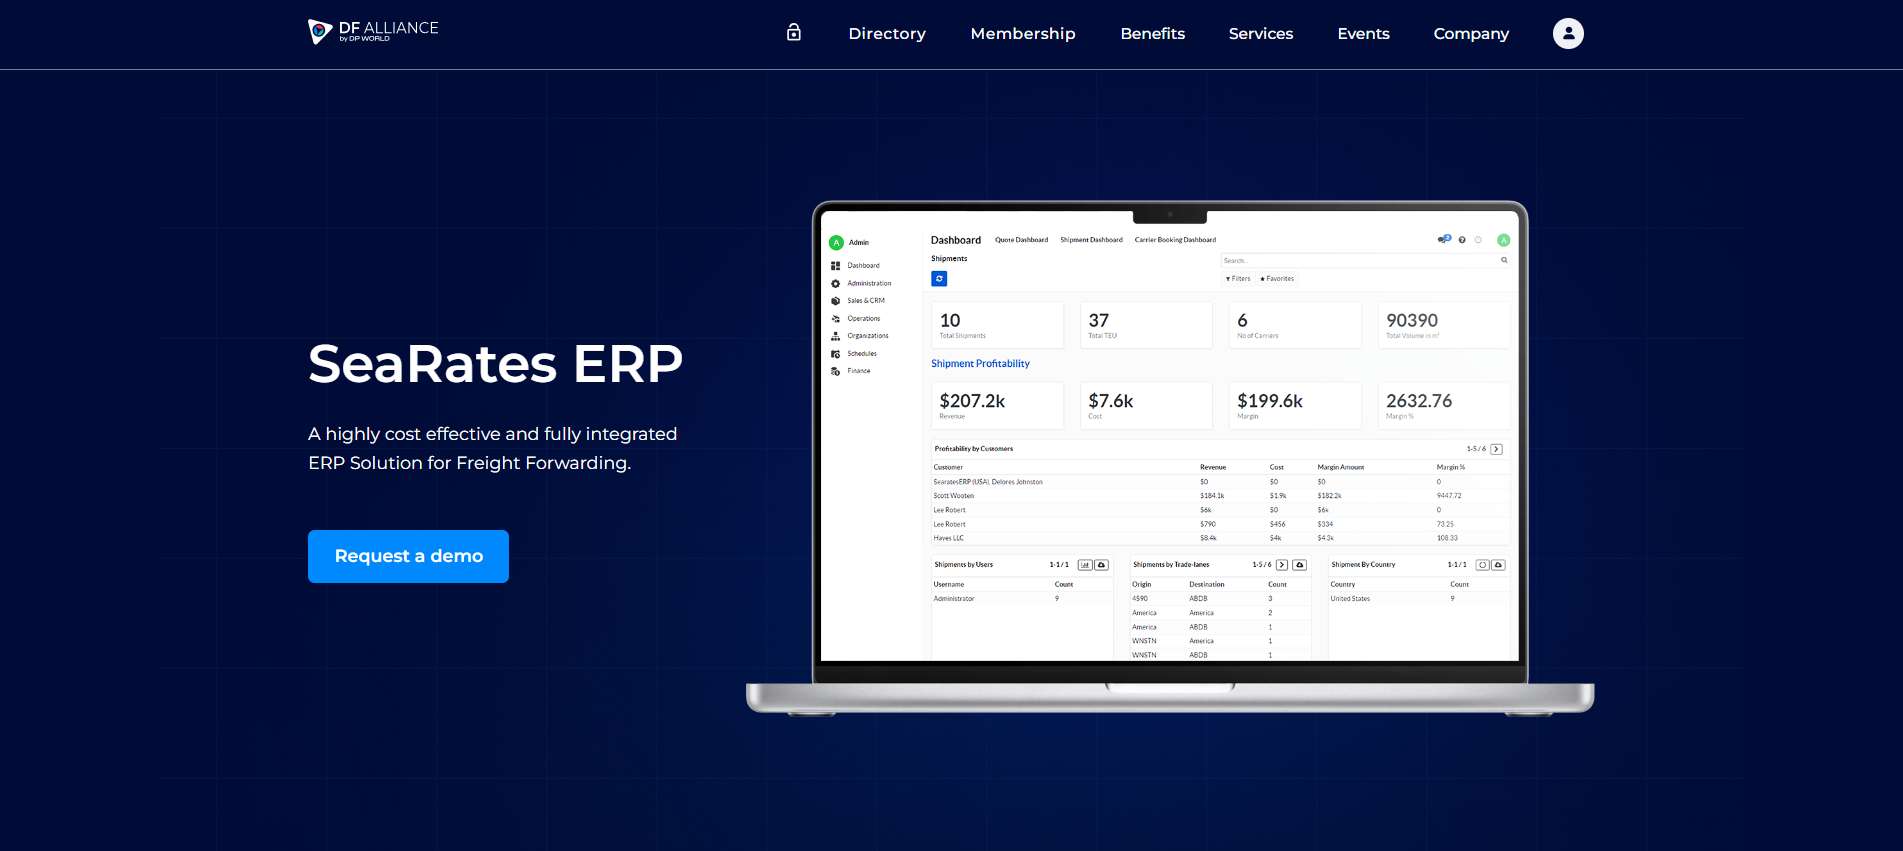 SeaRates ERP landing page